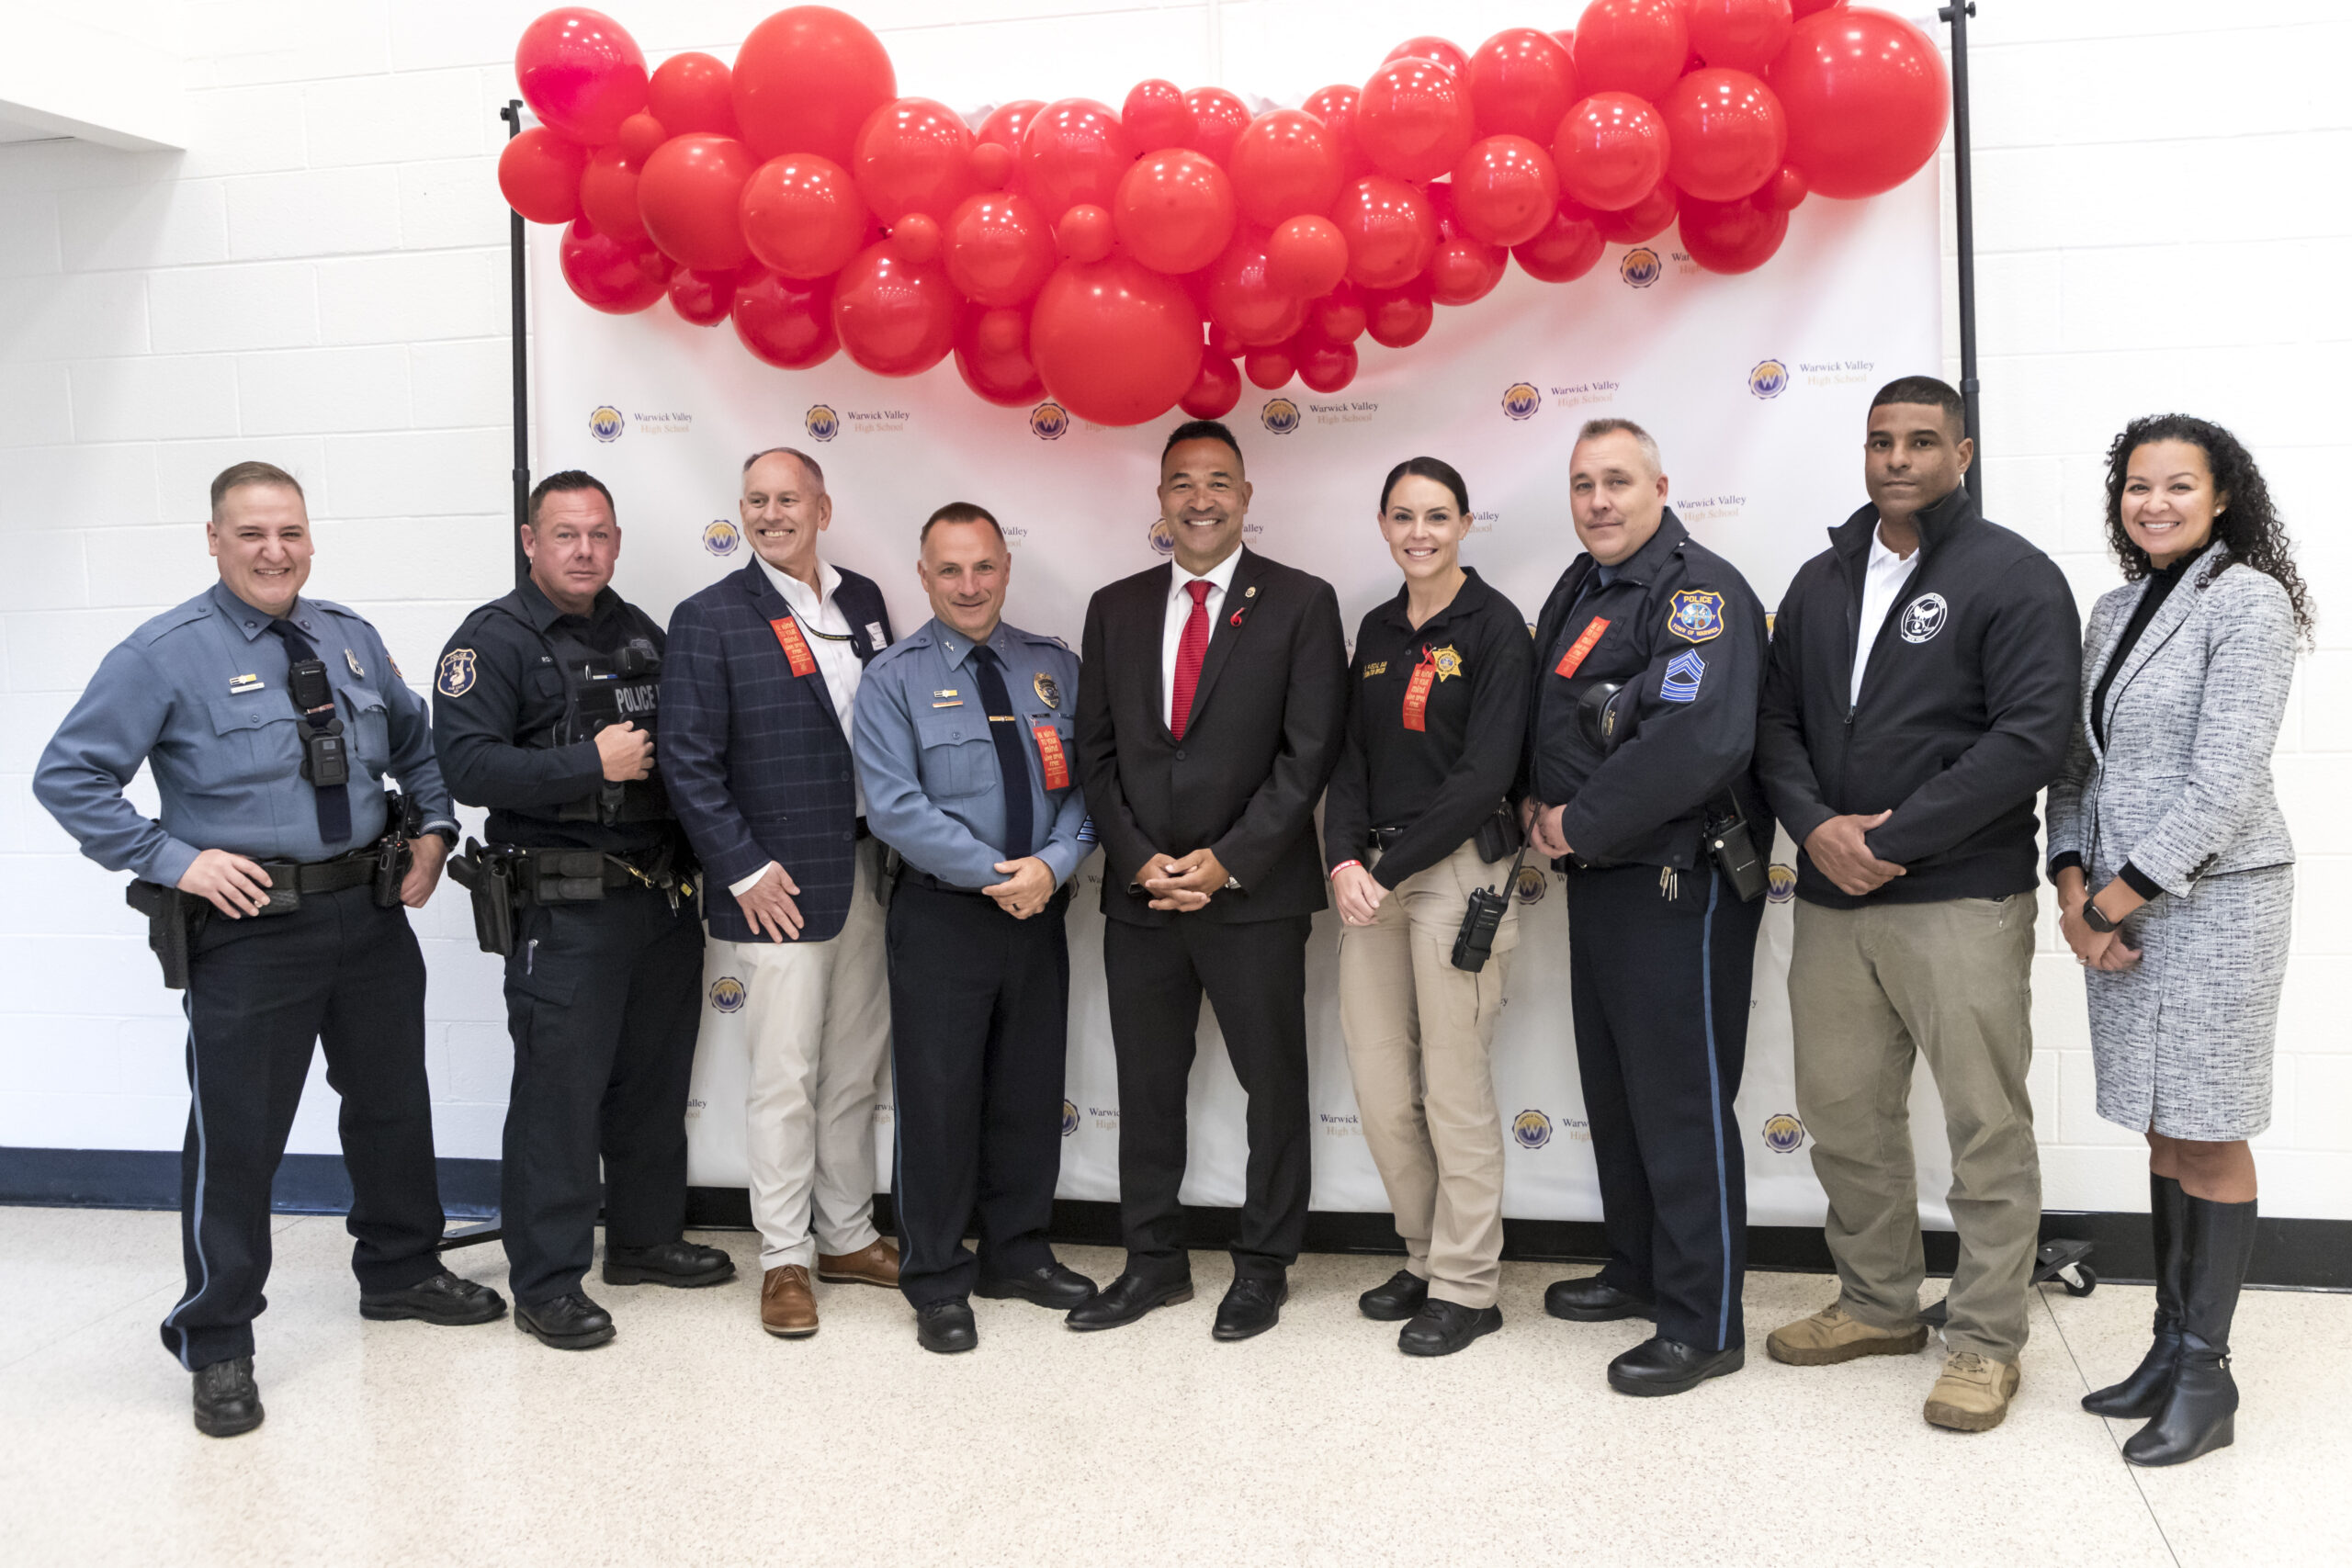 Event planned to kick-off Red Ribbon Week, Community News